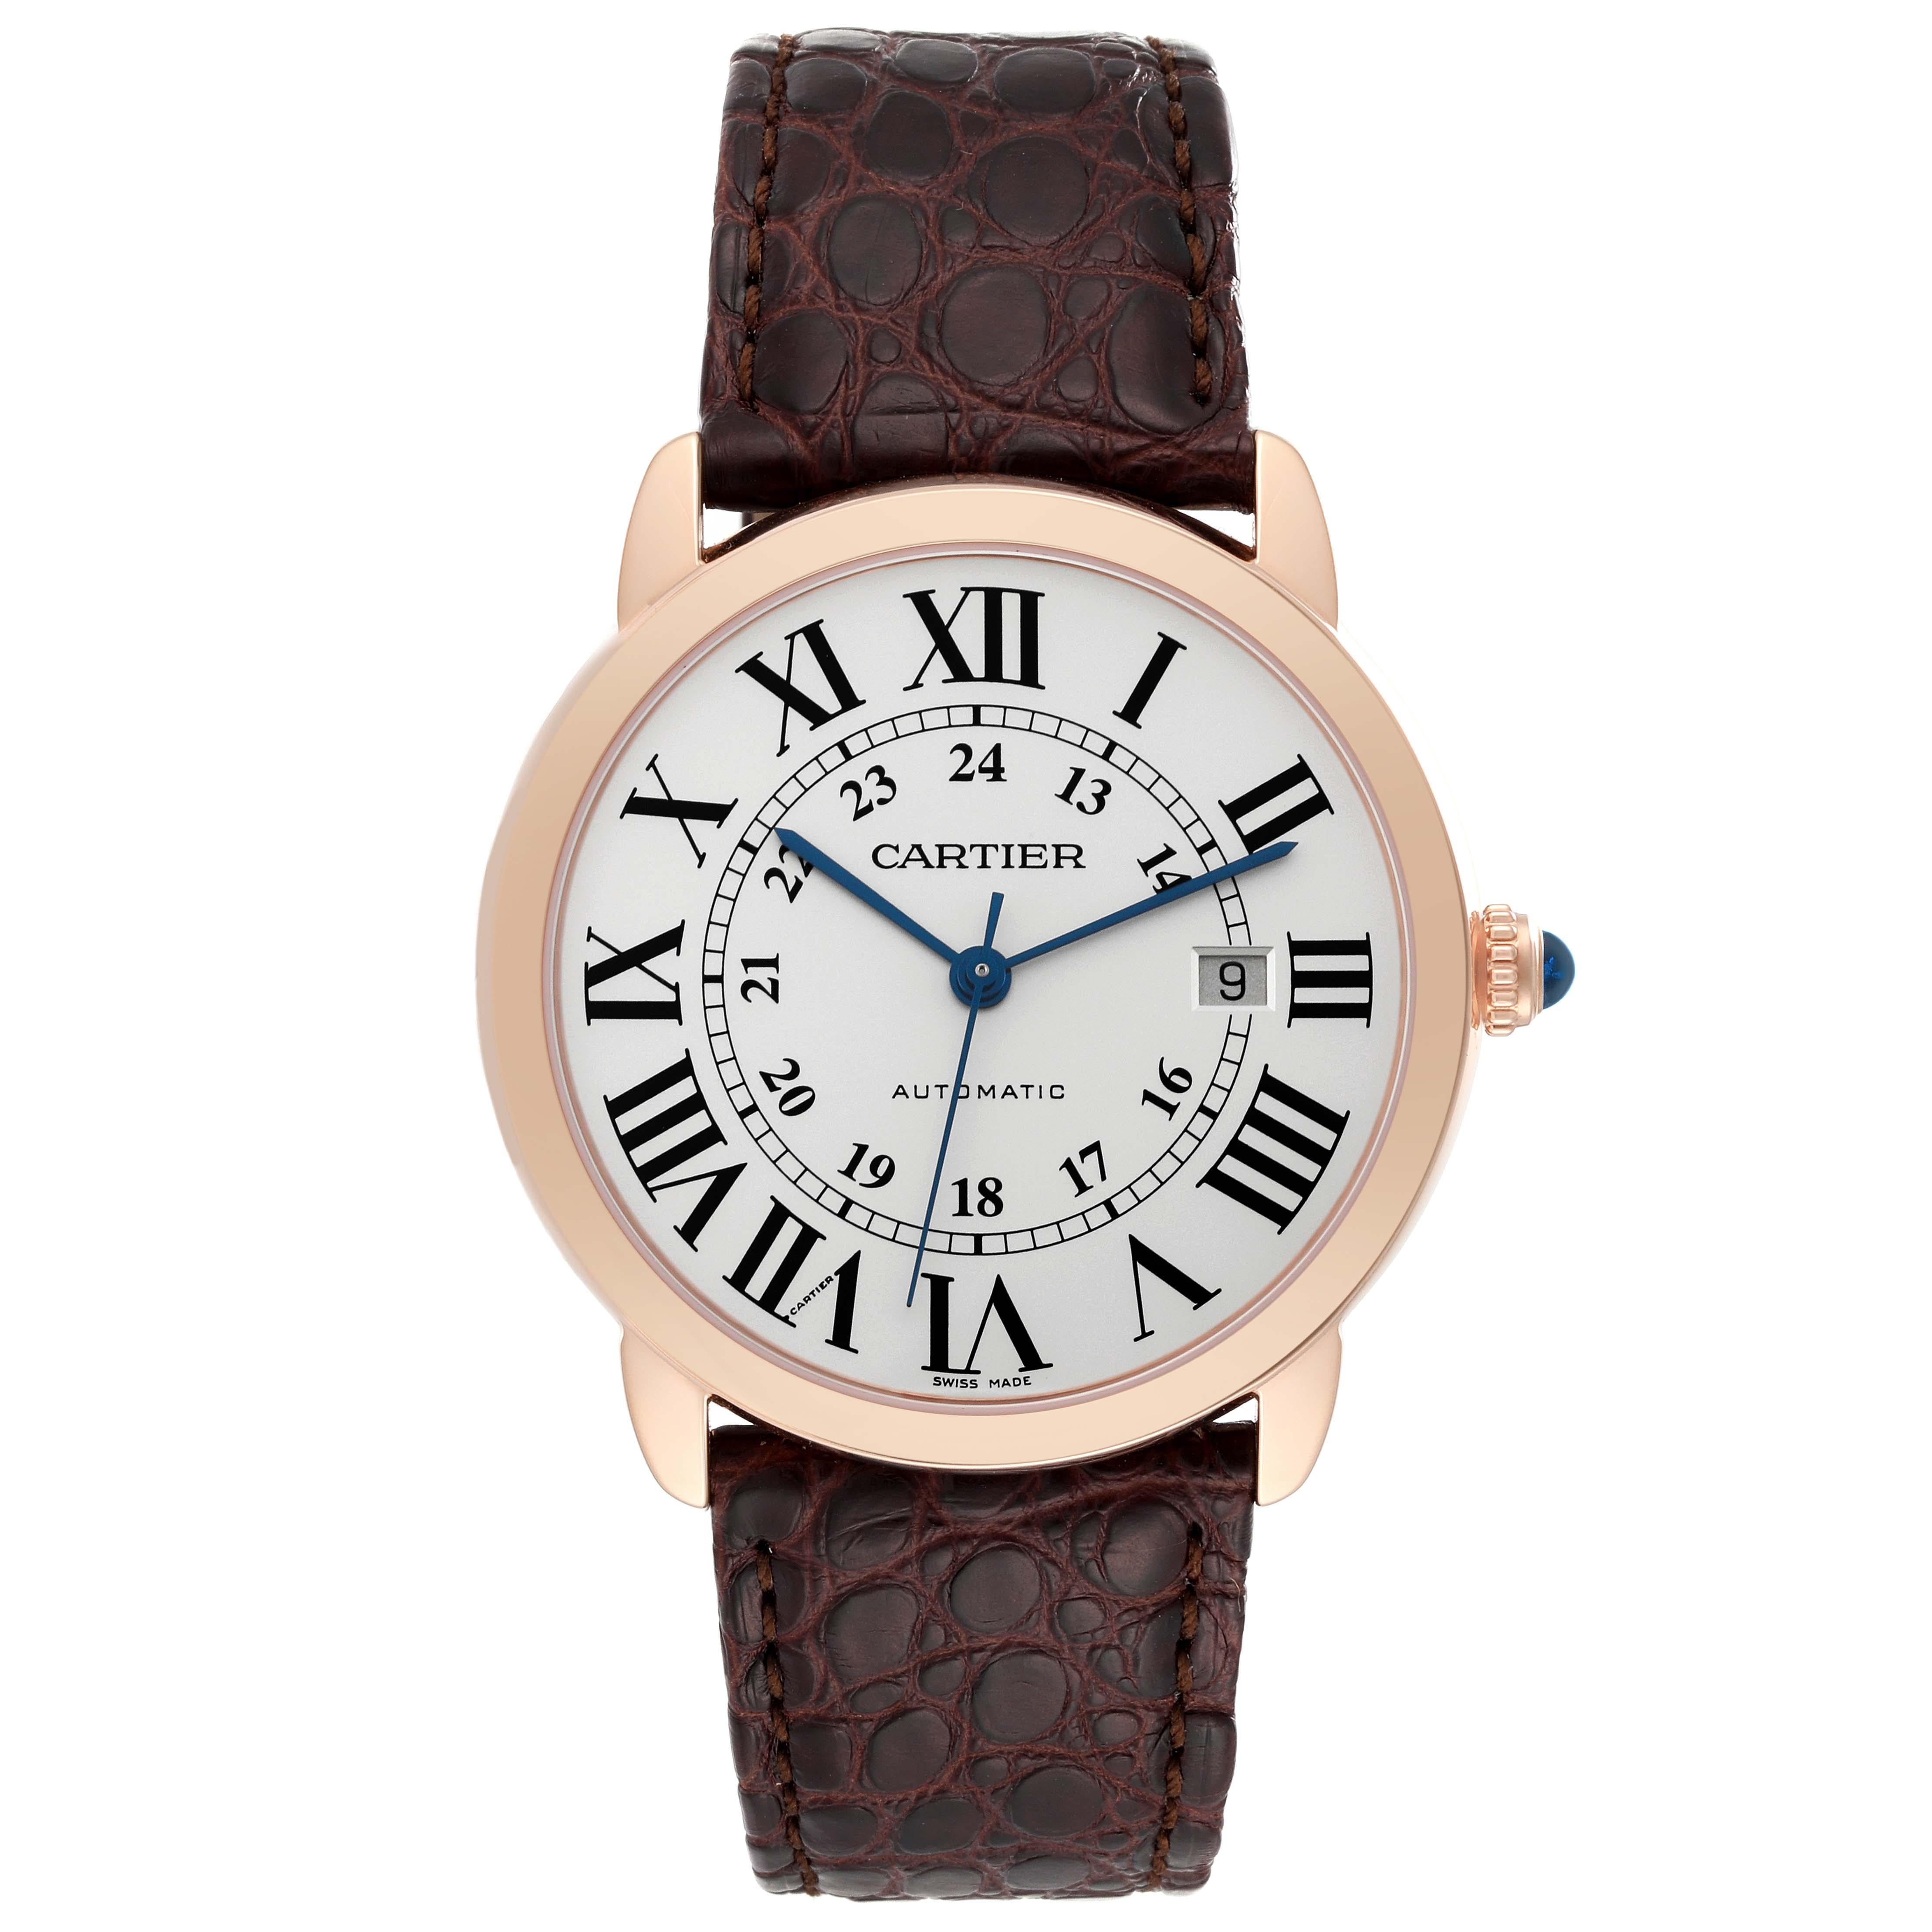 Cartier Ronde Solo XL Automatic Rose Gold Steel Mens Watch W6701009 Card. Automatic self-winding movement. 18K rose gold case 42.0 mm in diameter. Stainless steel case back. Circular grained crown set with a blue spinel cabochon. . Scratch resistant